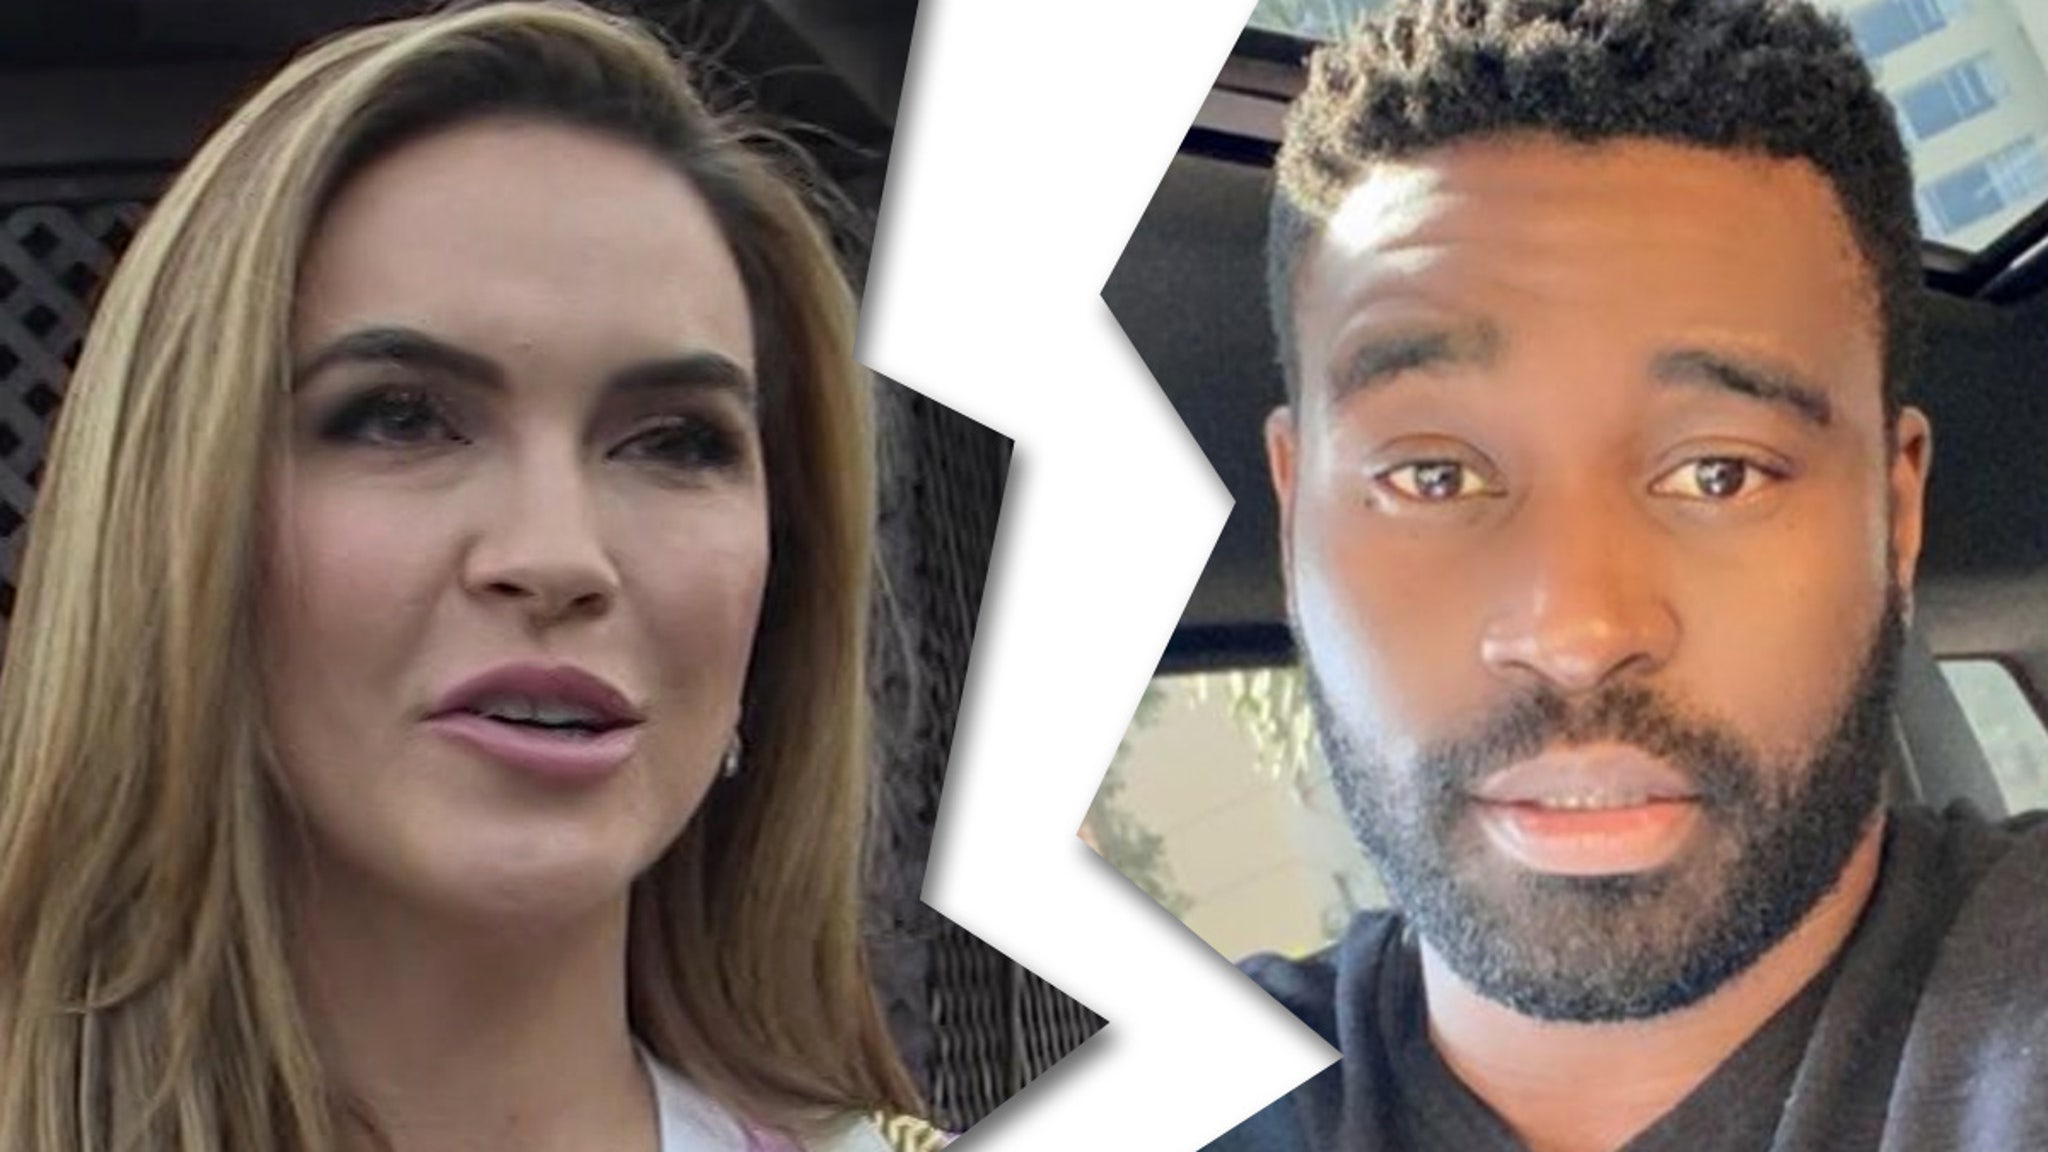 Chrishell Stause and Keo Motsepe split after 3 months of dating